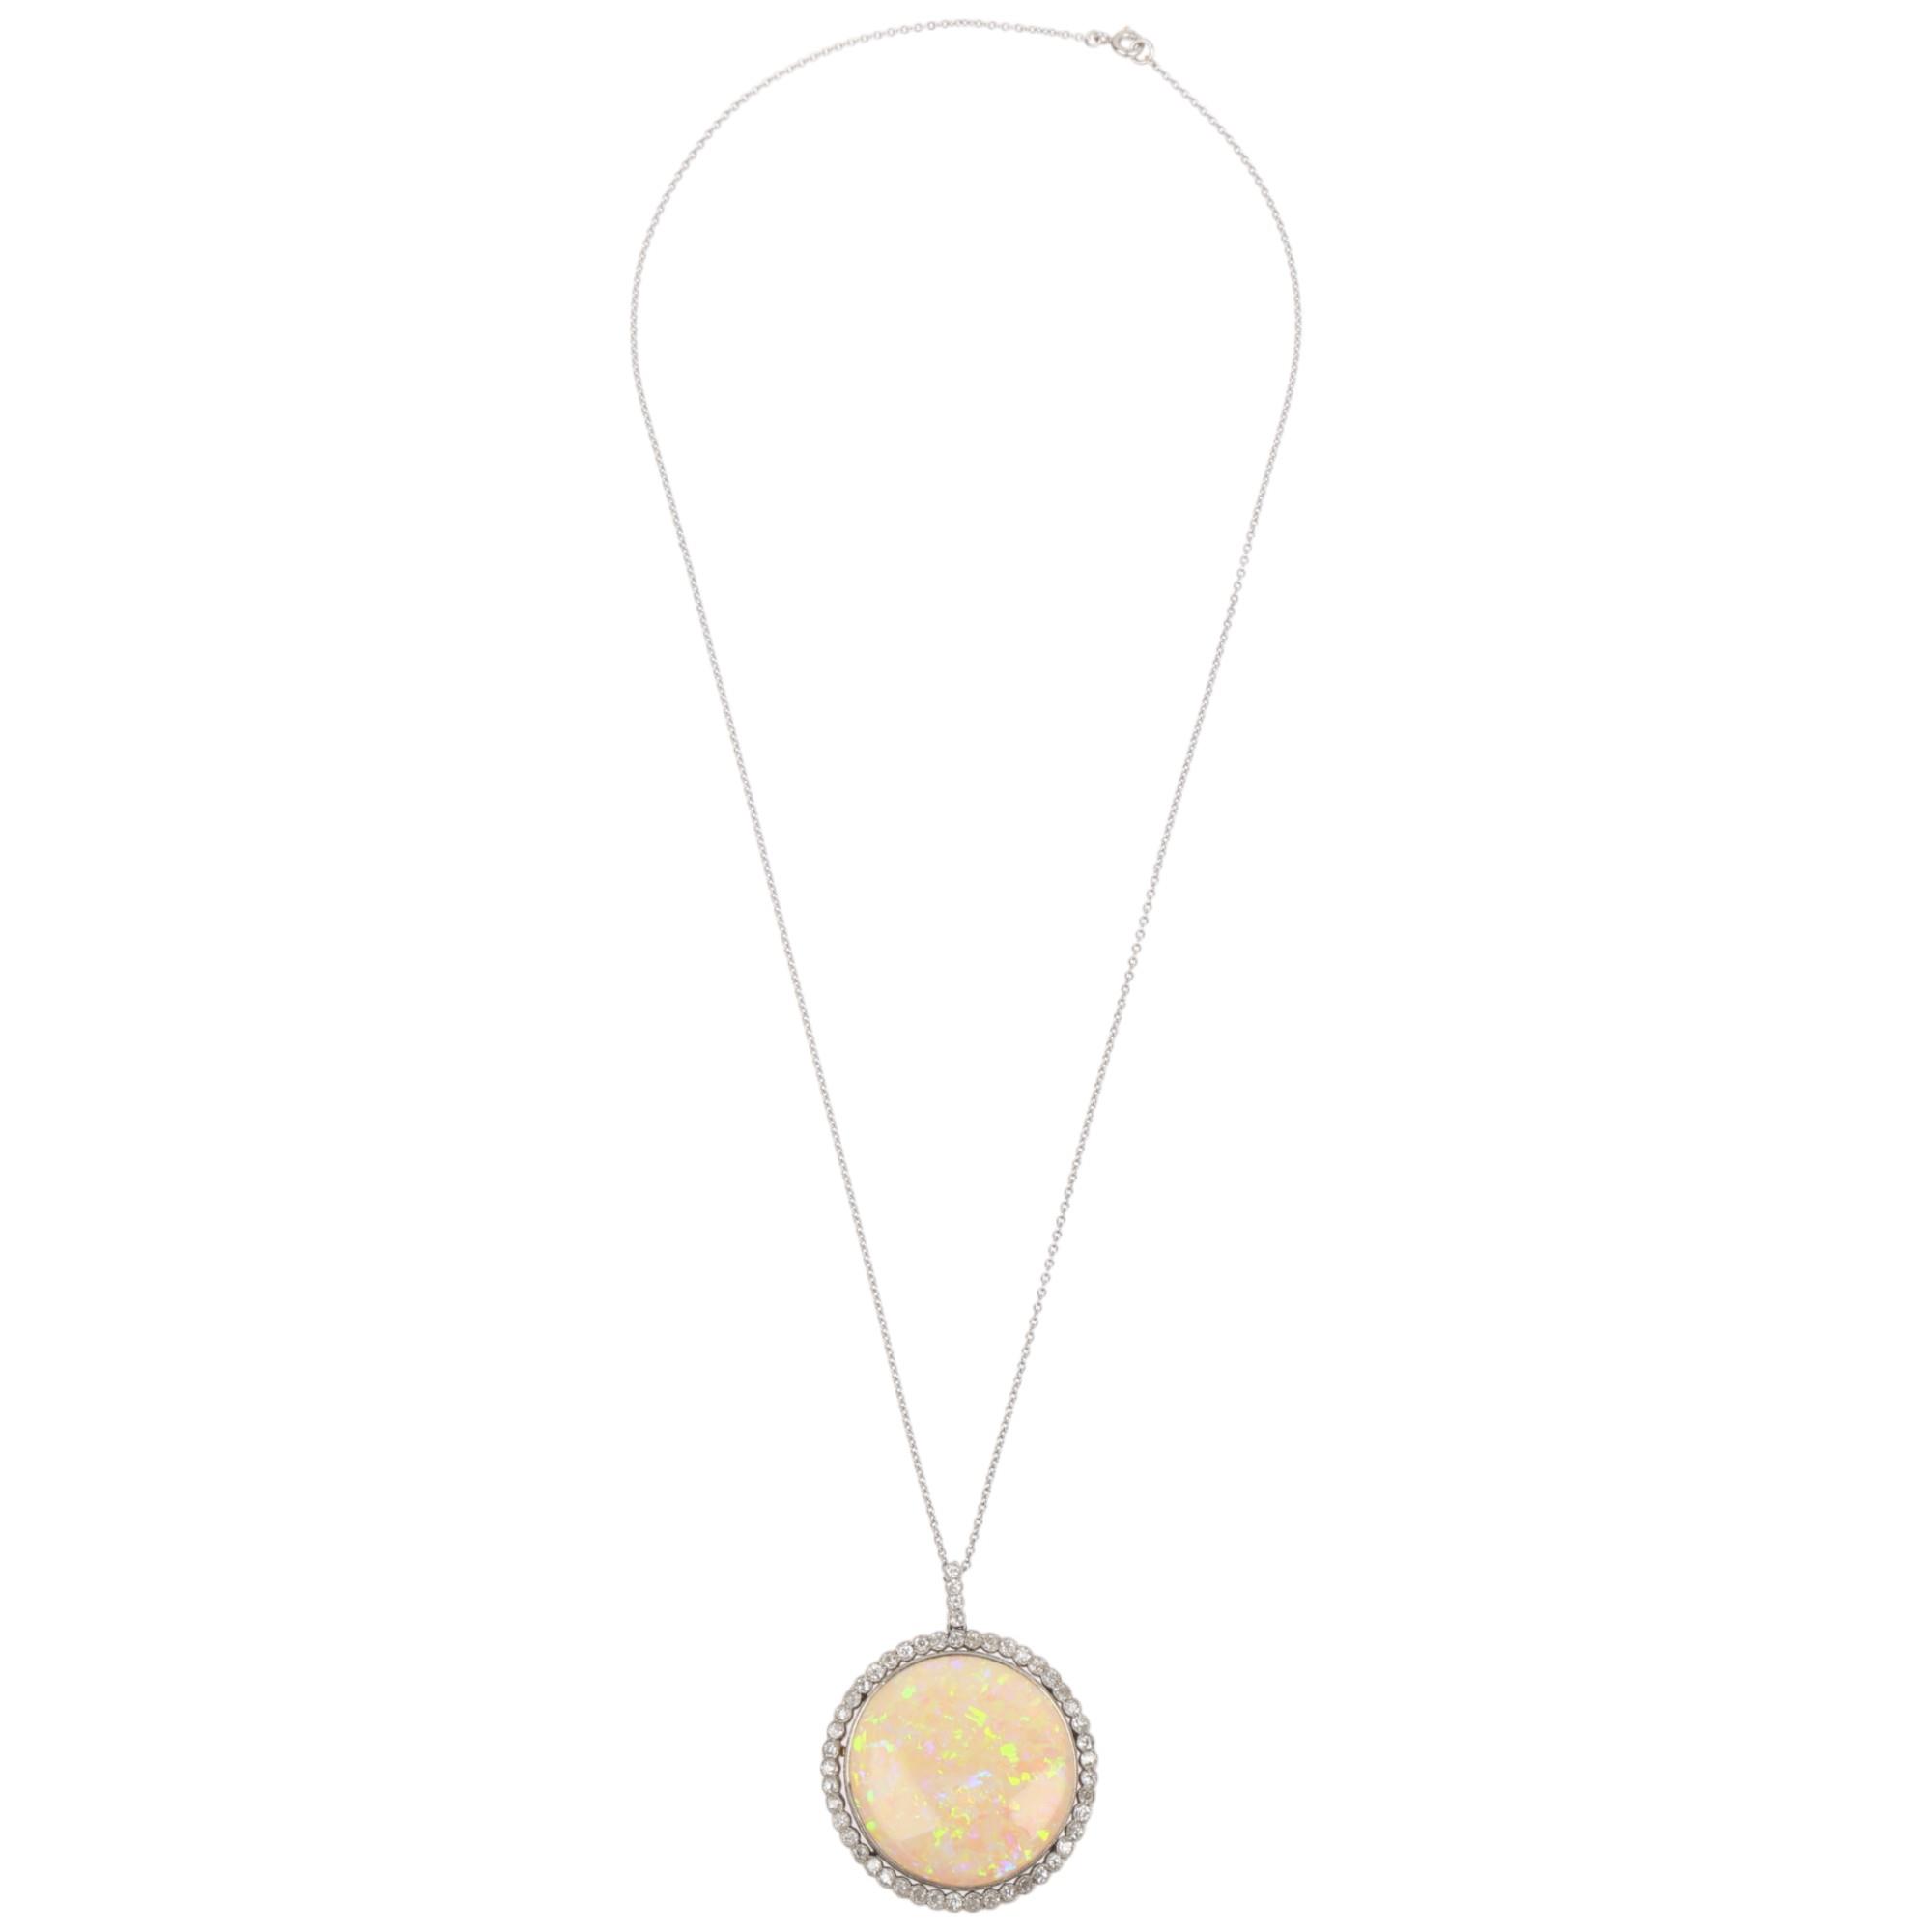 A Belle Epoque opal and diamond cluster pendant necklace, rub-over set with 15ct round cabochon opal - Image 2 of 5